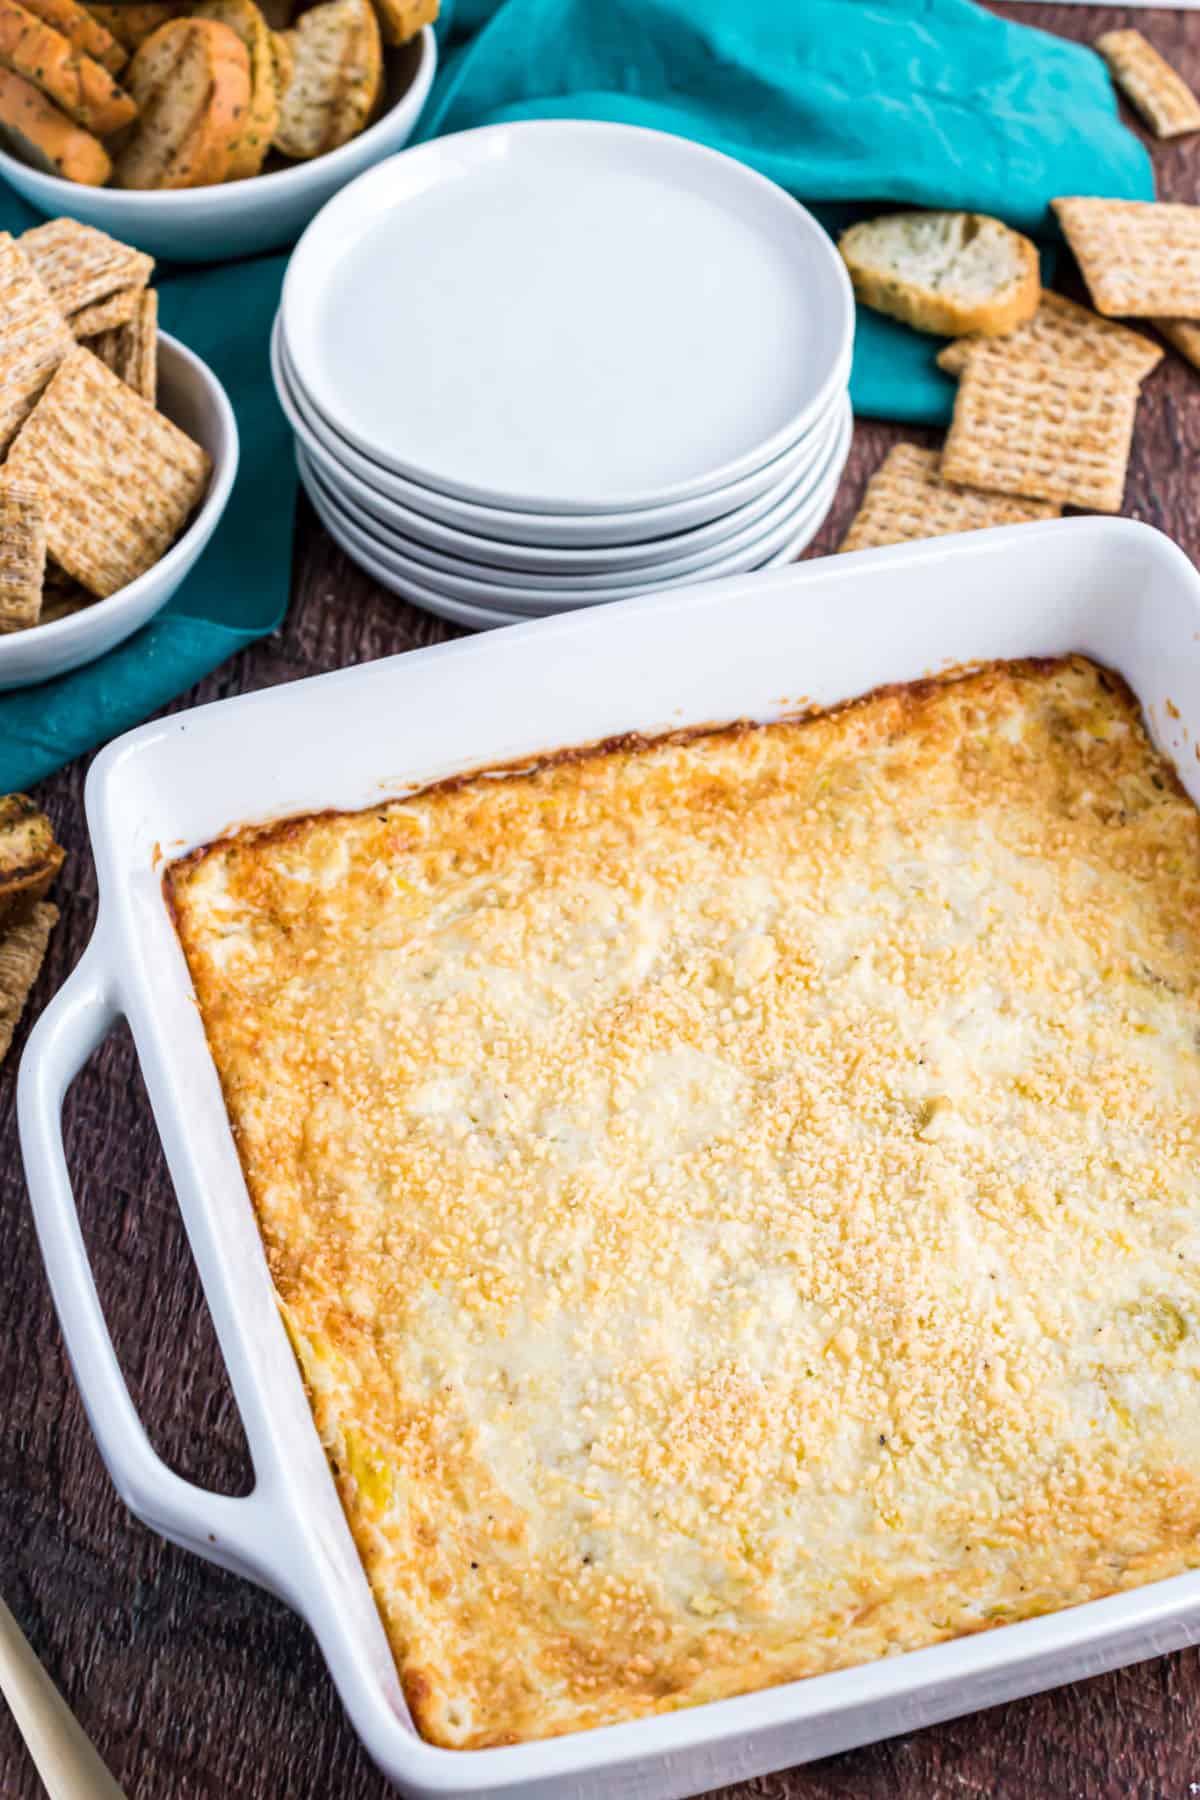 Artichoke dip baked in a square dish and served with triscuits.